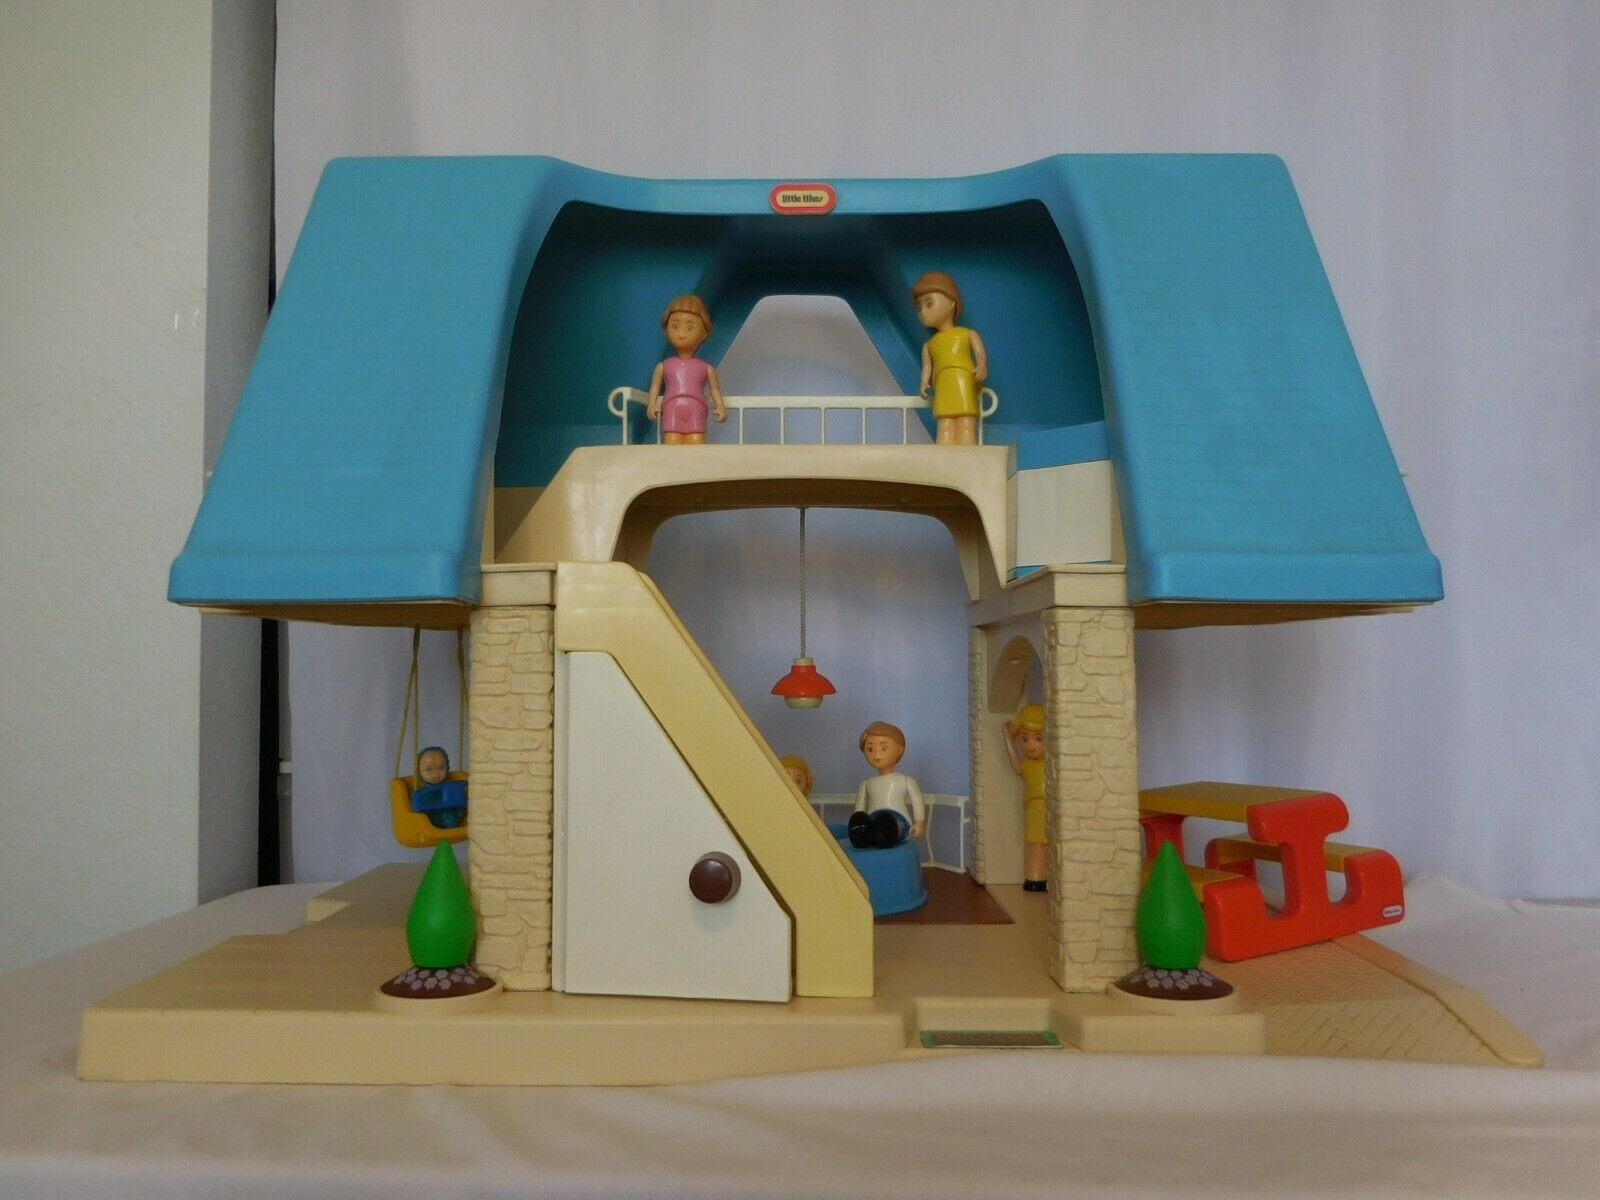 Little Tikes blue roof Doll house + Dolls + accessories + Pool + Picnic Table +  - $176.23